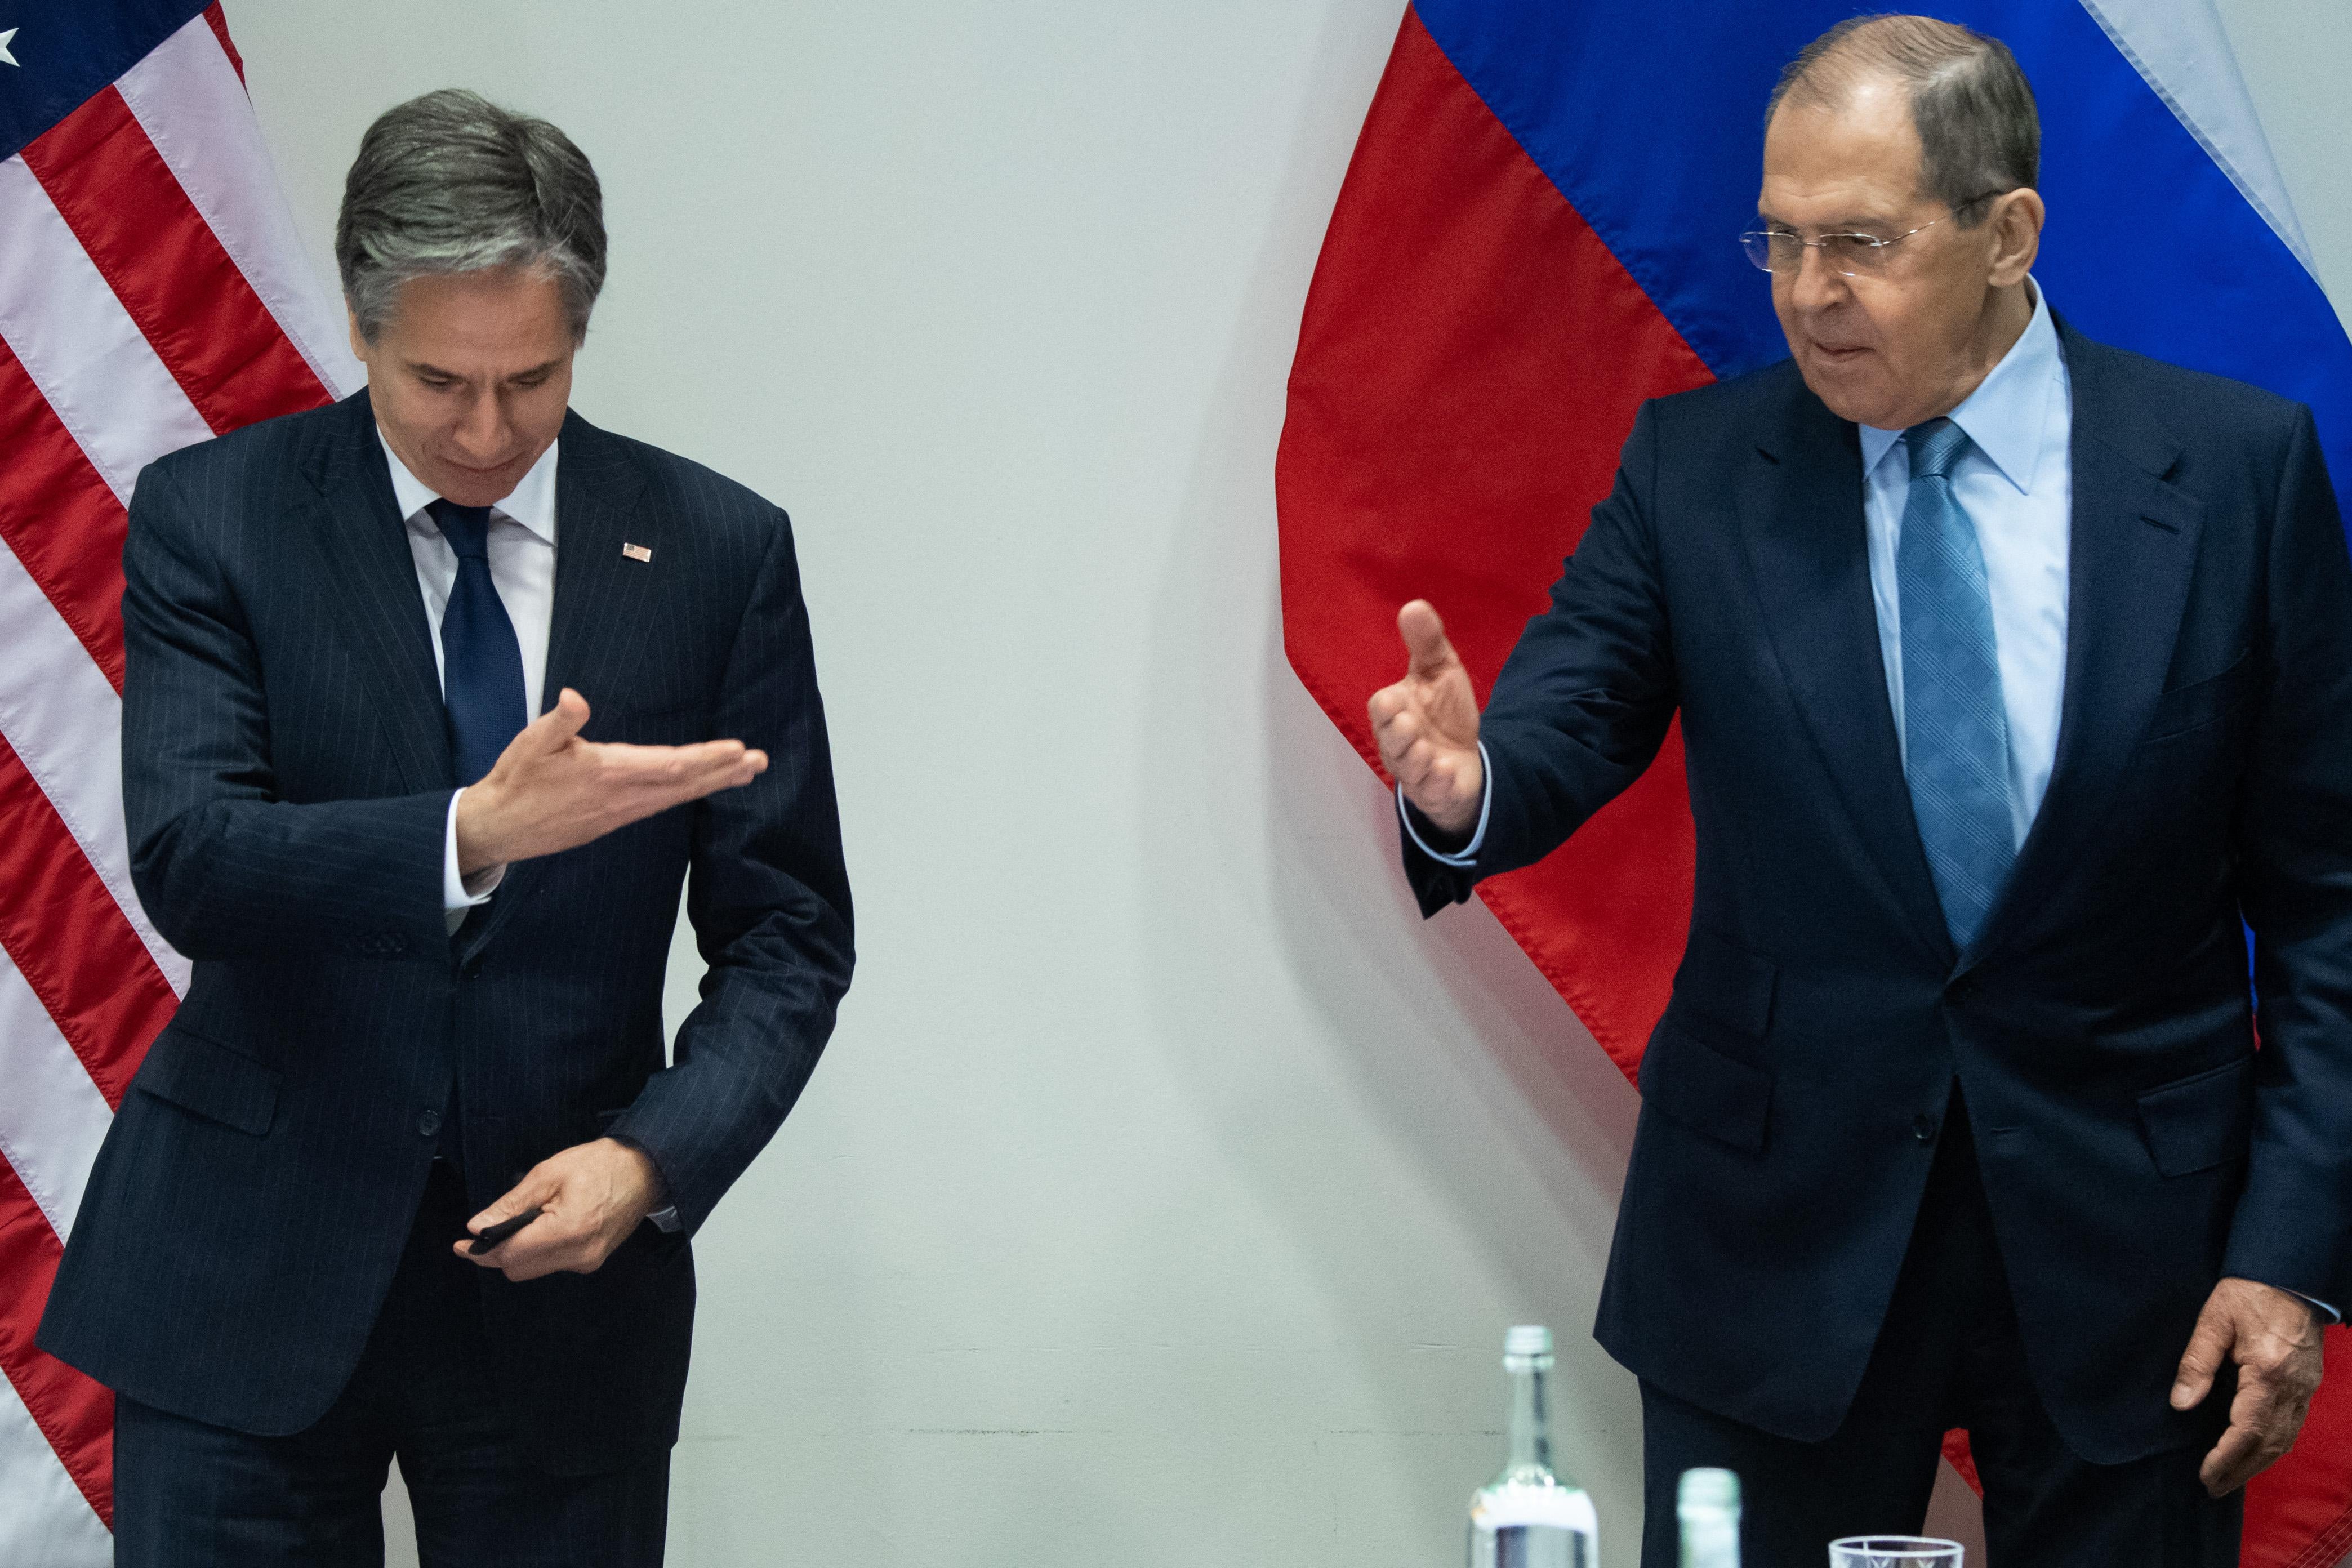 Secretary of State Blinken and Russian Foreign Minister Lavrov stand and gesture before they meet in Reykjavik, Iceland.